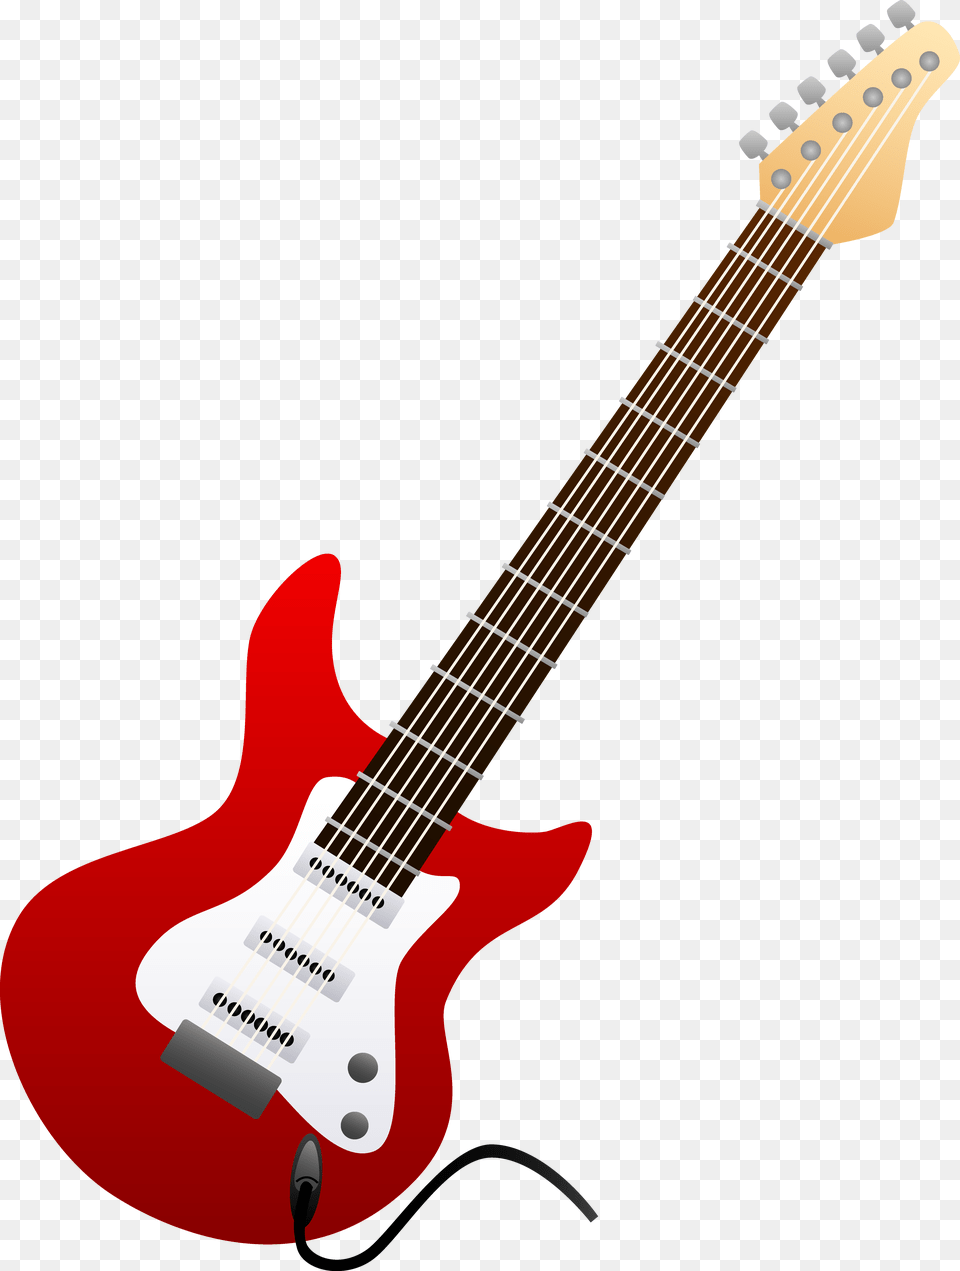 Pete The Cat Clipart With Guitar Clip Art Images, Electric Guitar, Musical Instrument, Bass Guitar Png Image